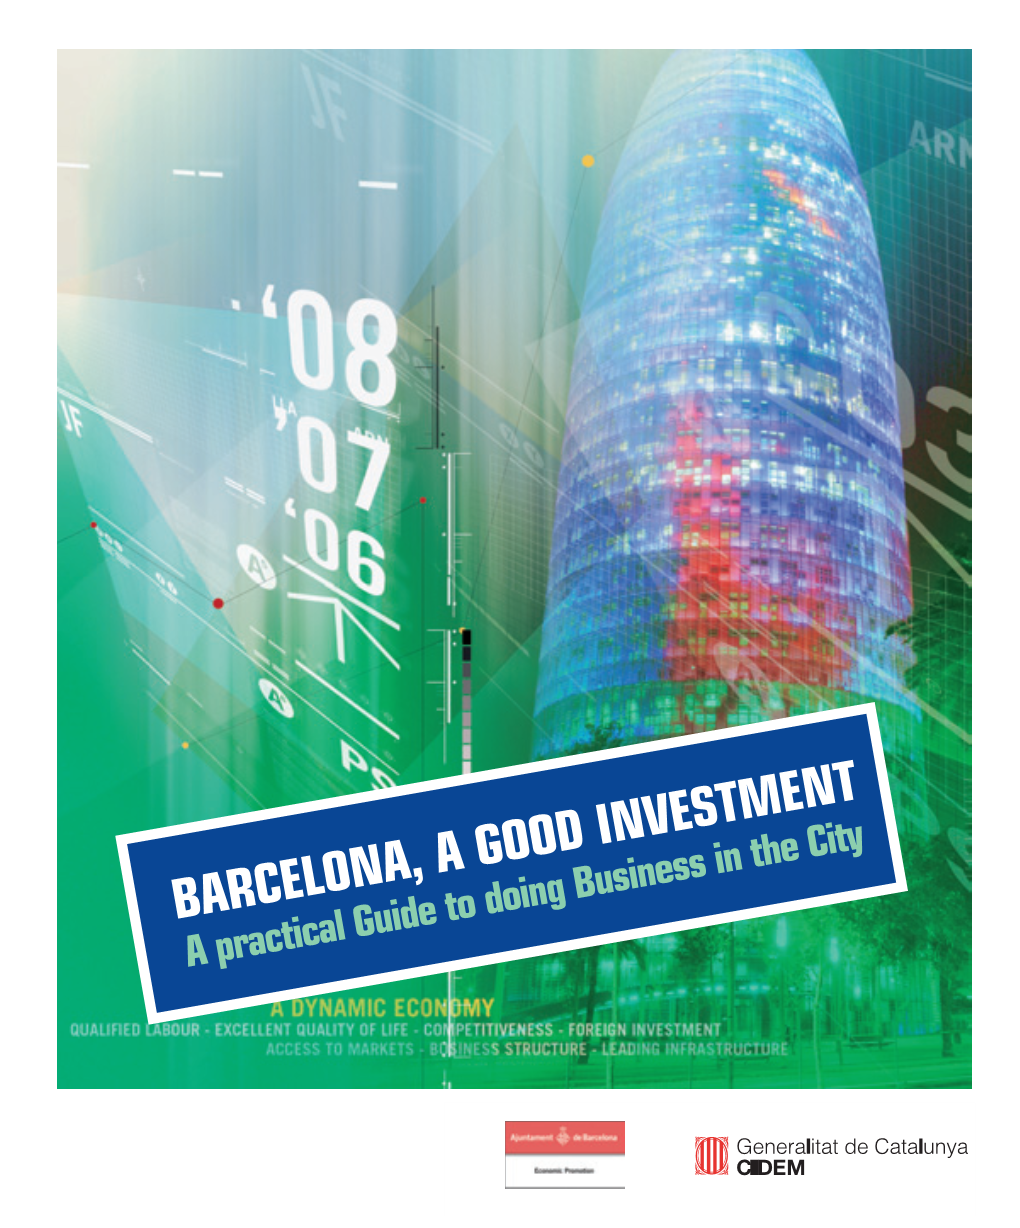 BARCELONA, a GOOD INVESTMENT a Practical Guide to Doing Business in the City